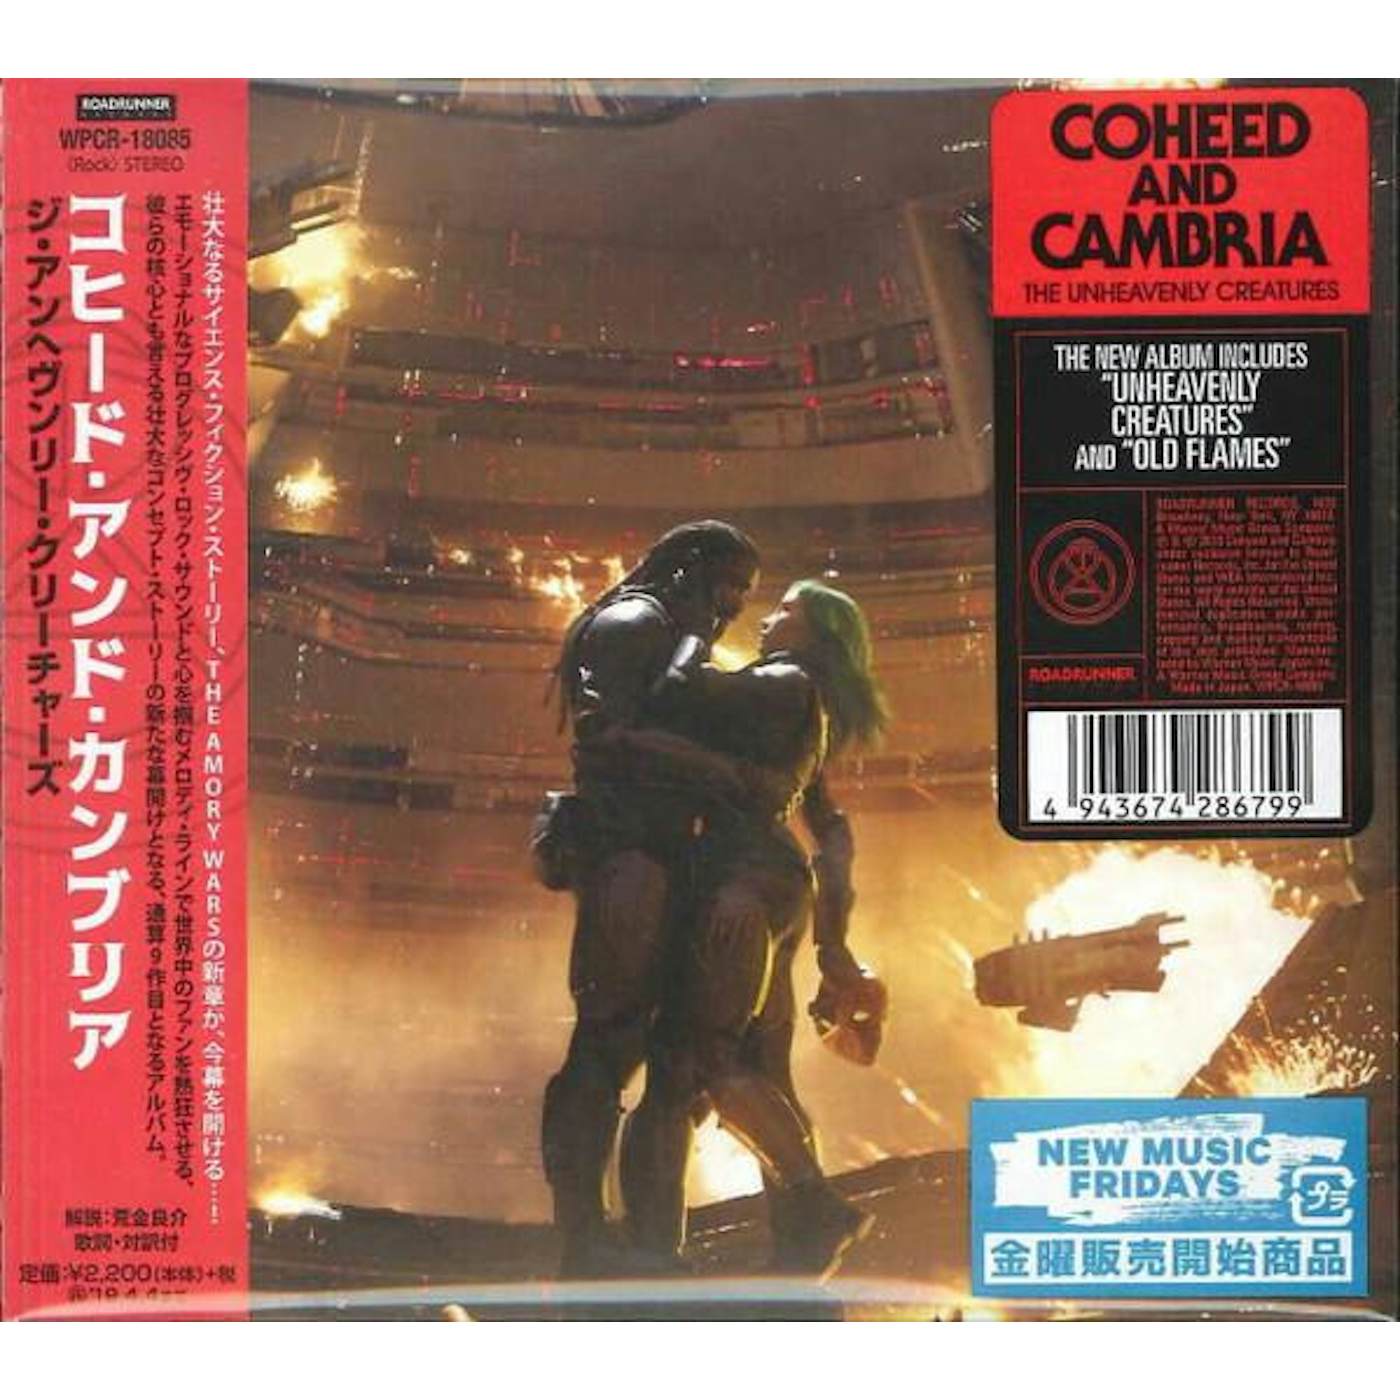 Coheed and Cambria UNHEAVENLY CREATURES CD